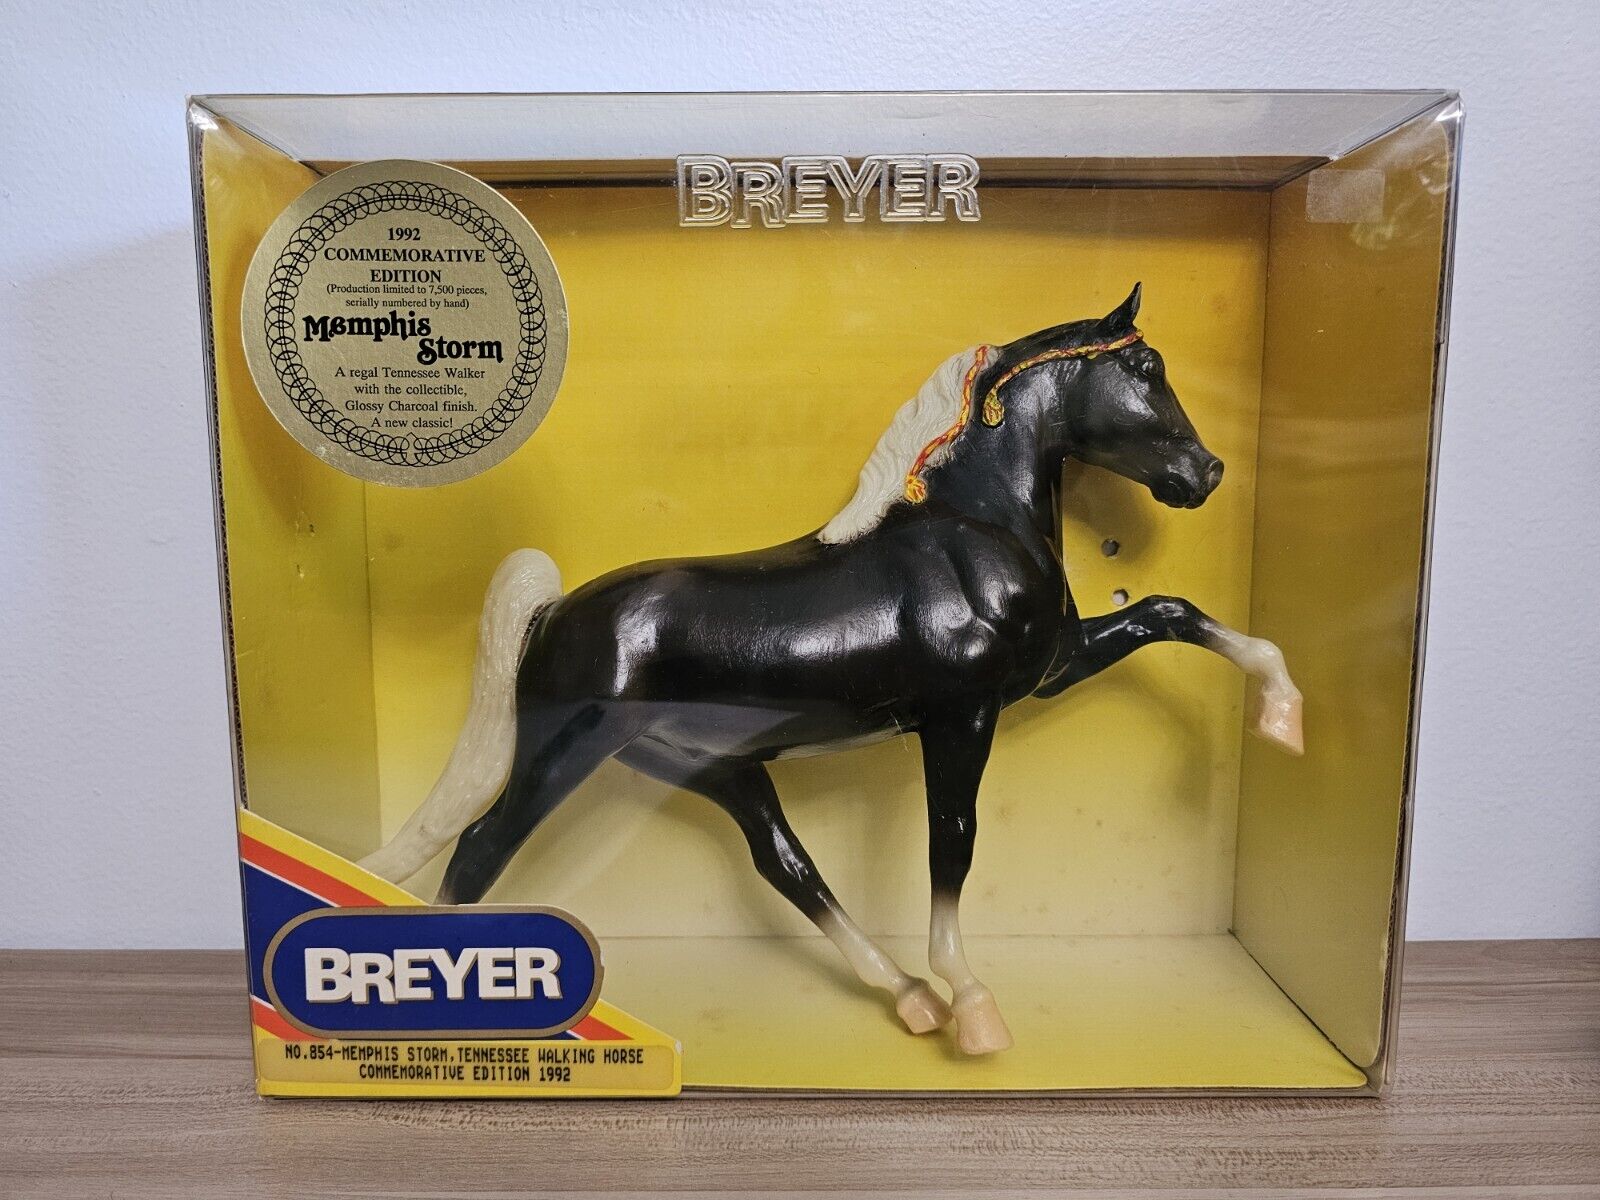 Breyer 854 Memphis Storm Tennessee Walking Horse New In Box Commenrative Edition